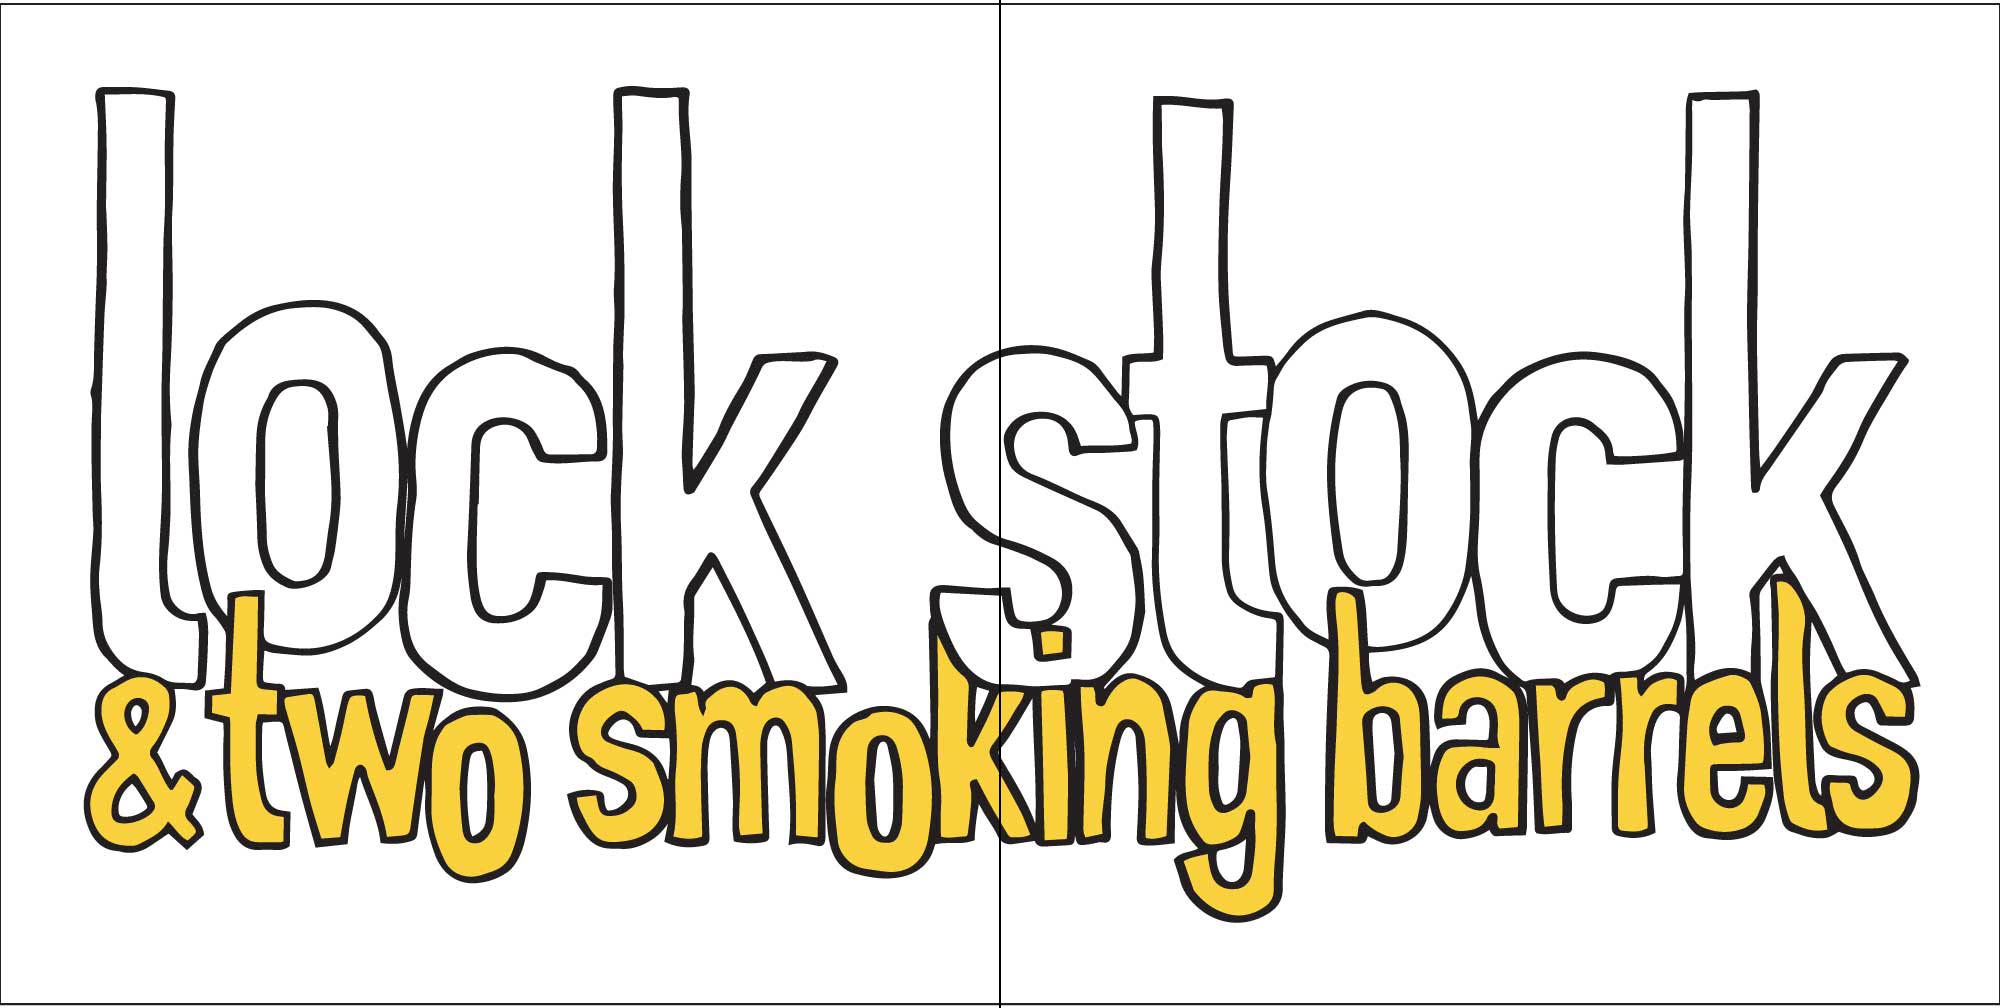 Lock Stock & Two Smoking Barrels Chapter Cover